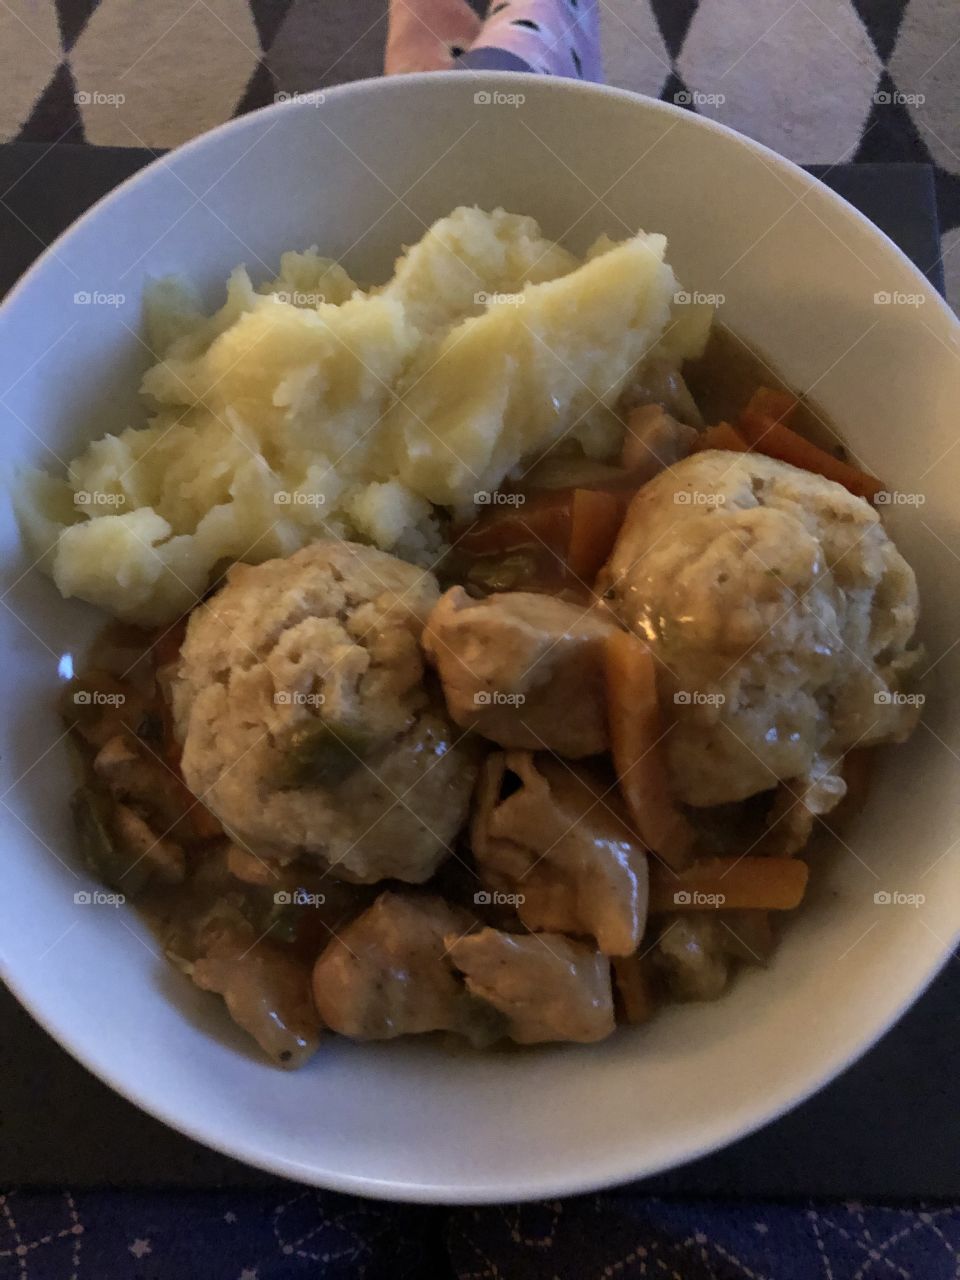 Chicken casserole with mashed potatoes and dumplings’ so delicious 